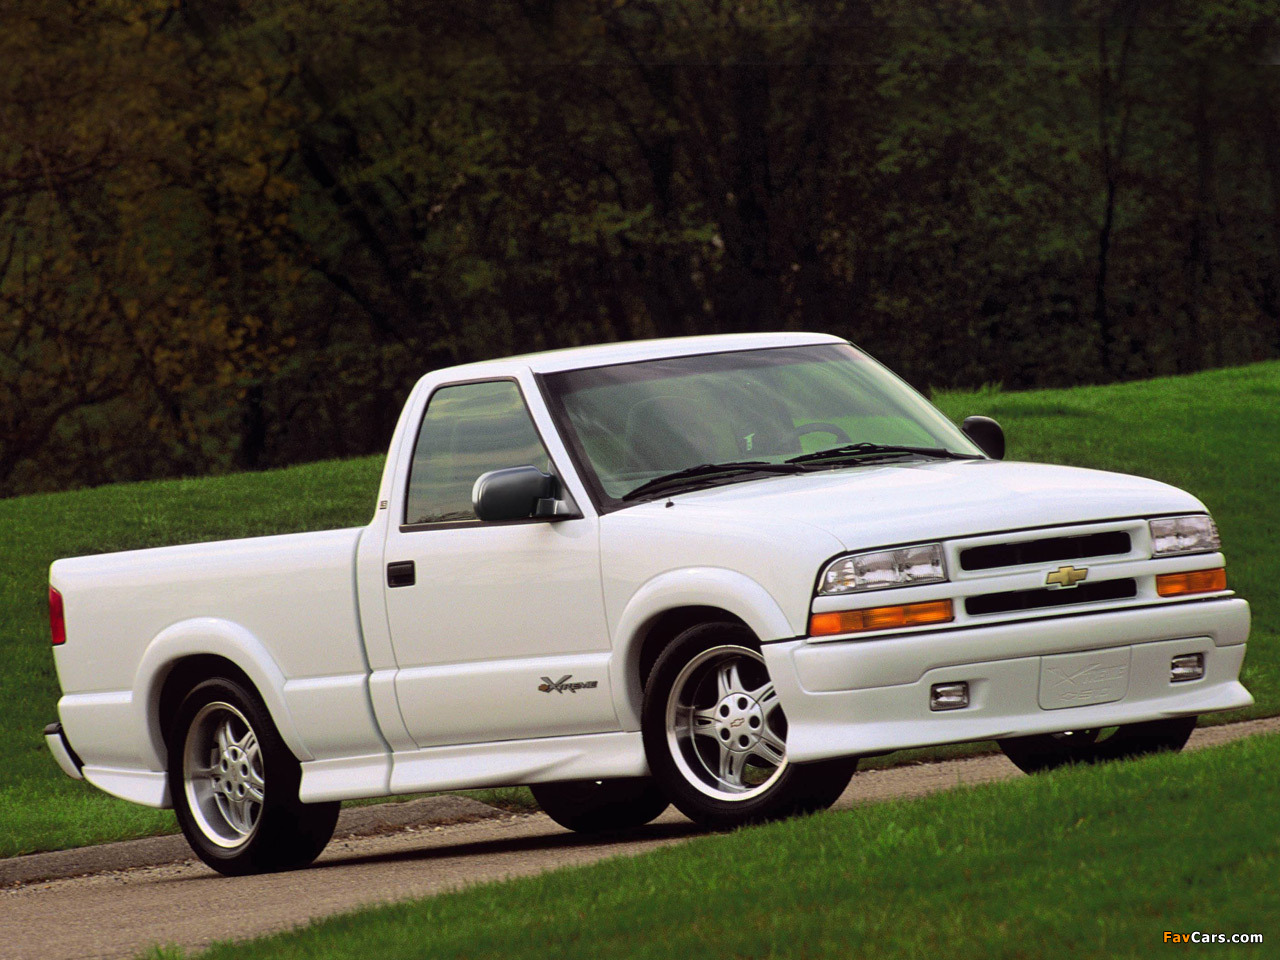 Chevrolet S-10 2WD LS Xtreme Regular Cab 1999 pictures (1280 x 960)